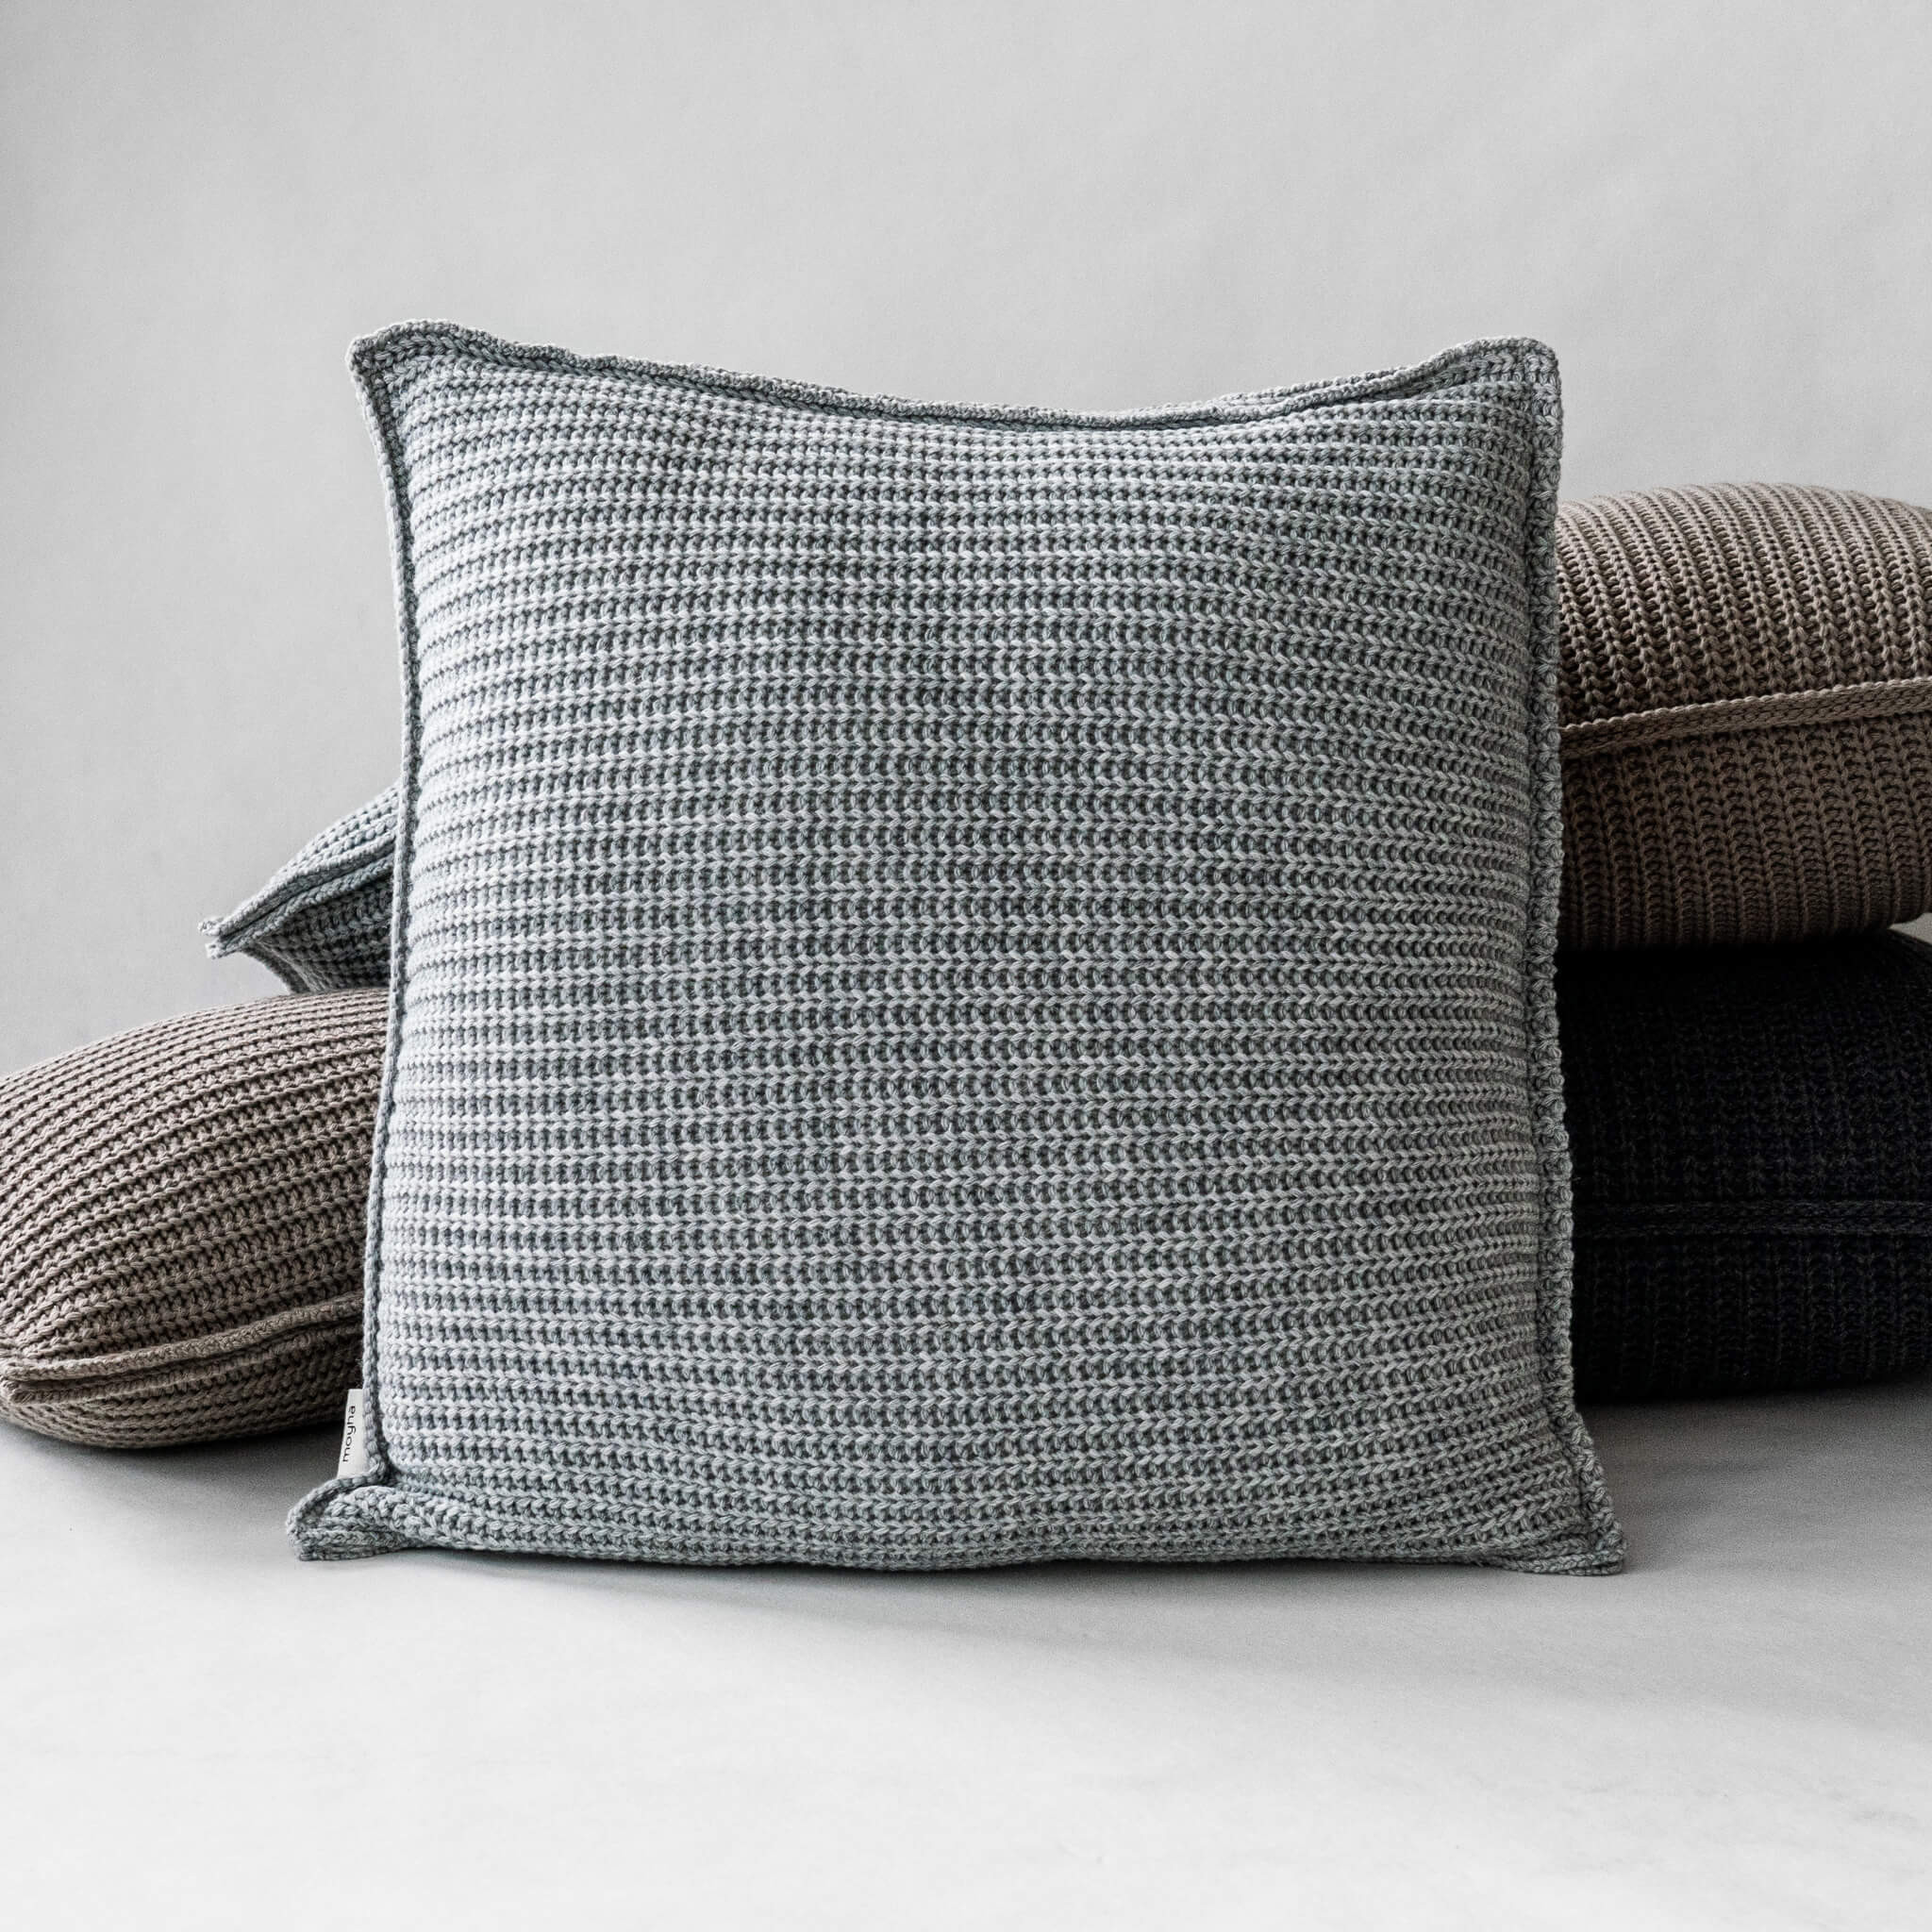 SOFT WEAVE CUSHION COVER Light Grey